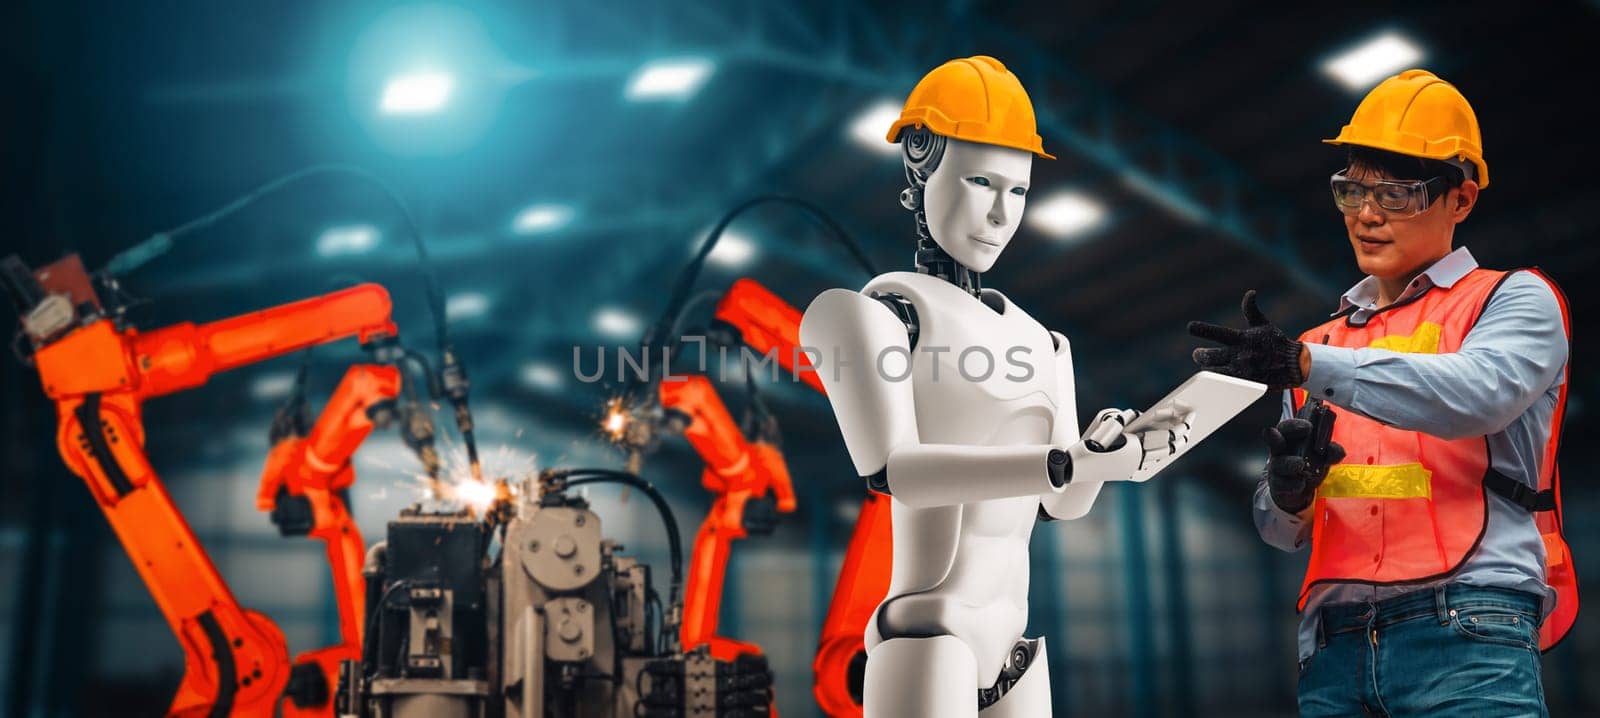 XAI Mechanized industry robot and human worker working together in future factory. Concept of artificial intelligence for industrial revolution and automation manufacturing process.